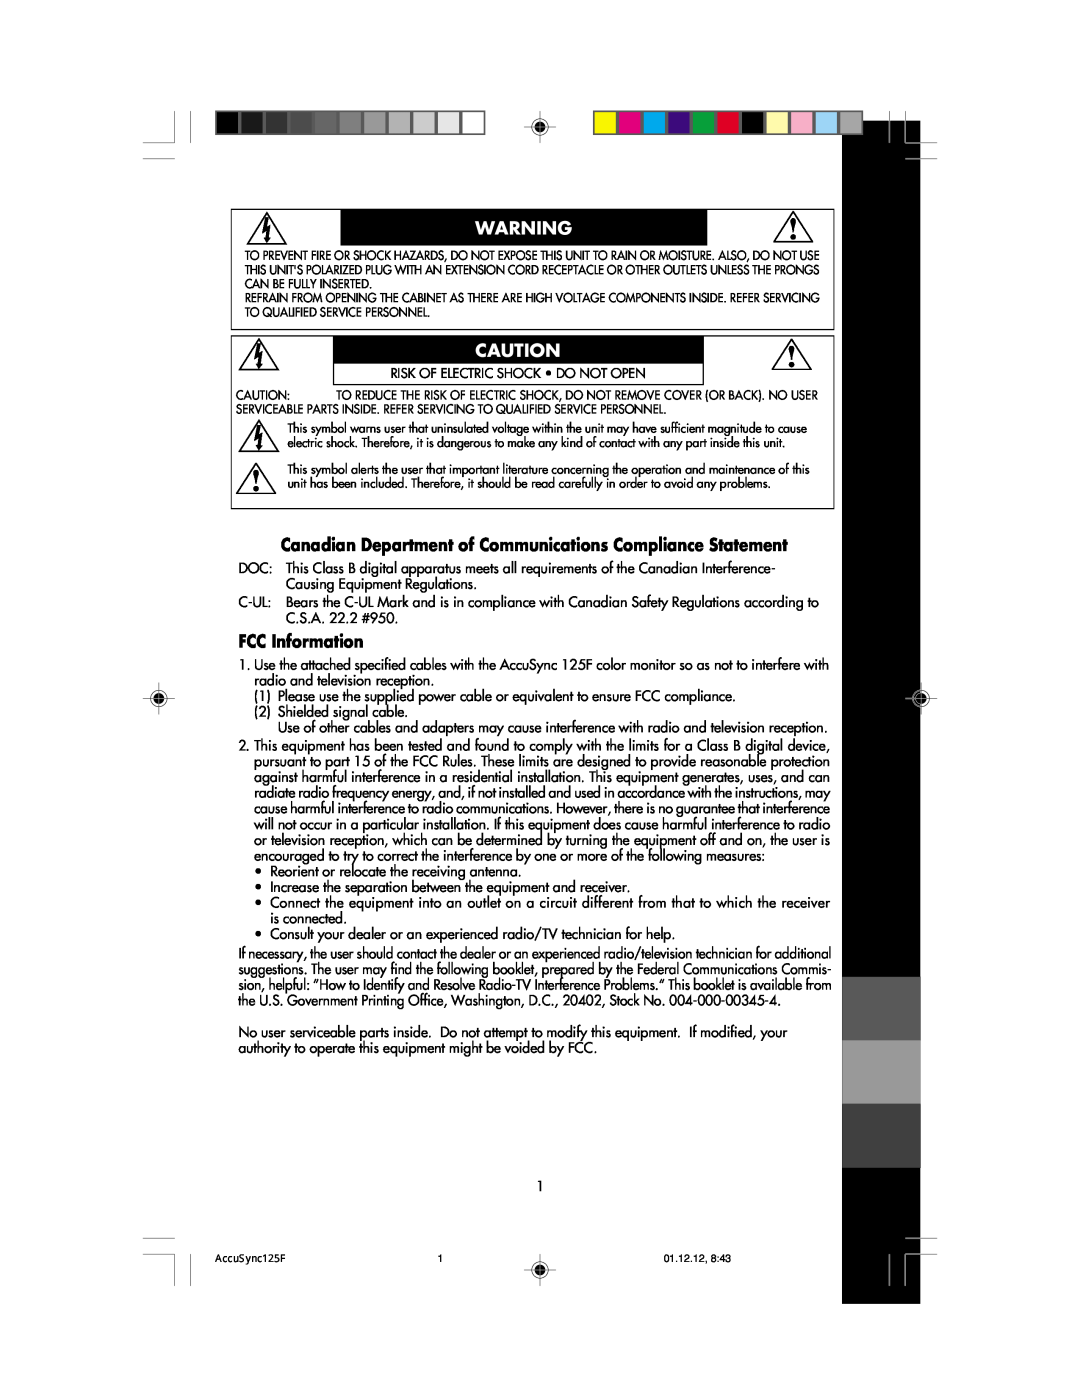 NEC 125F user manual Canadian Department of Communications Compliance Statement, FCC Information 